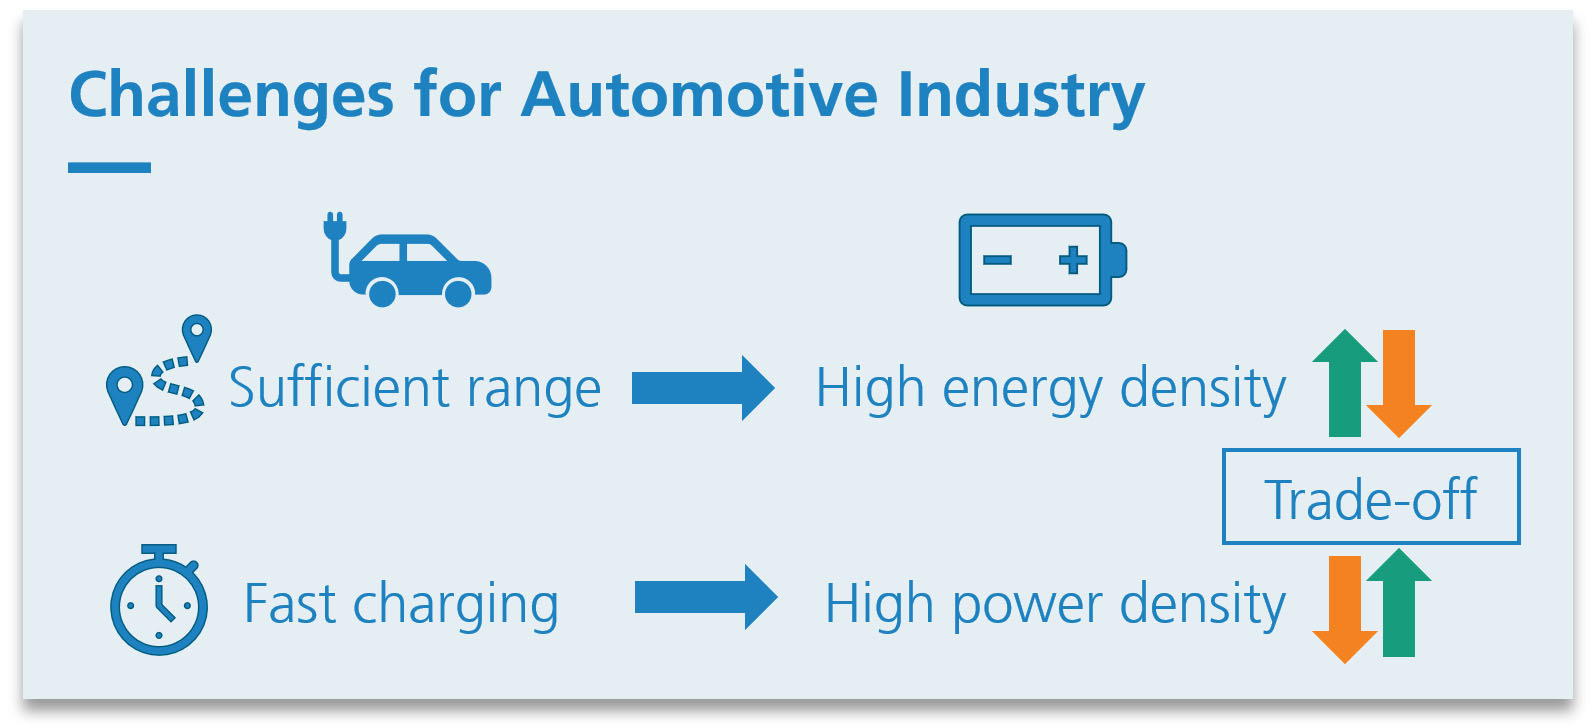 Challenges for the automotive industry and their impact on the requirements for Li-ion batteries for electric vehicles